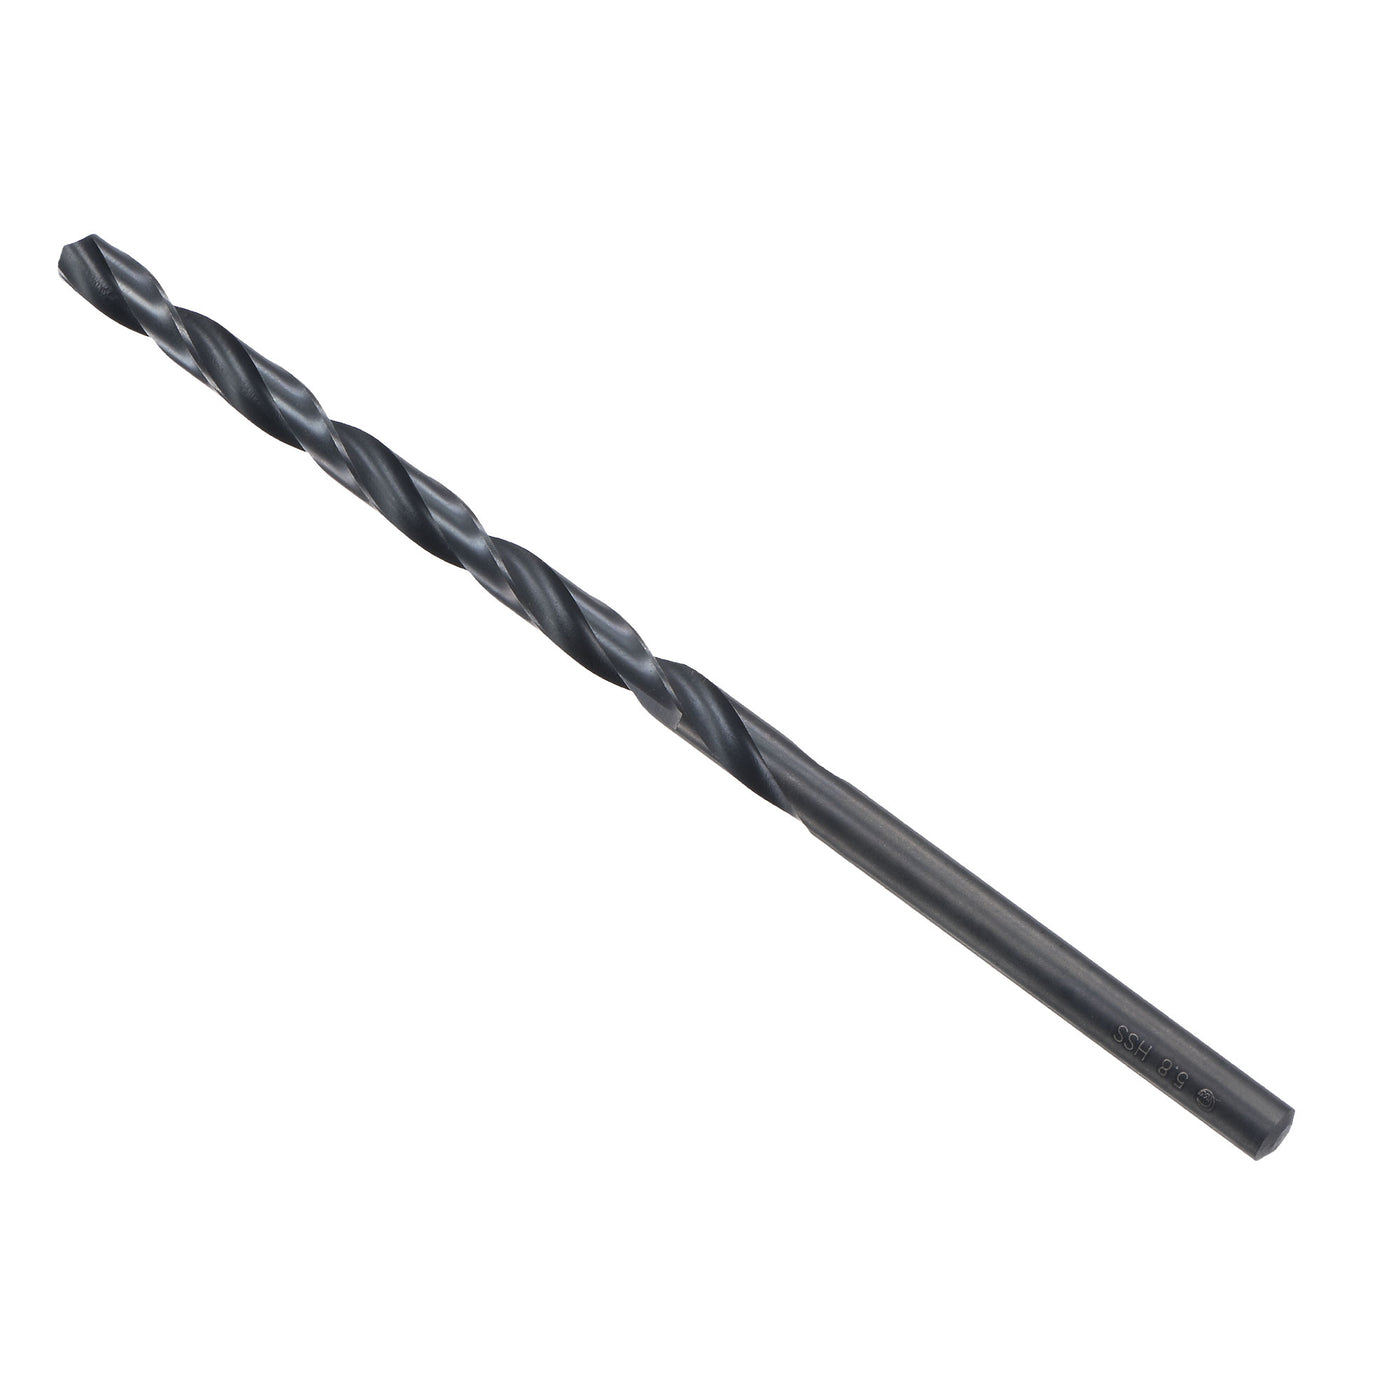 uxcell Uxcell High Speed Steel Lengthen Twist Drill Bit 5.8mm Fully Ground Black Oxide 2Pcs